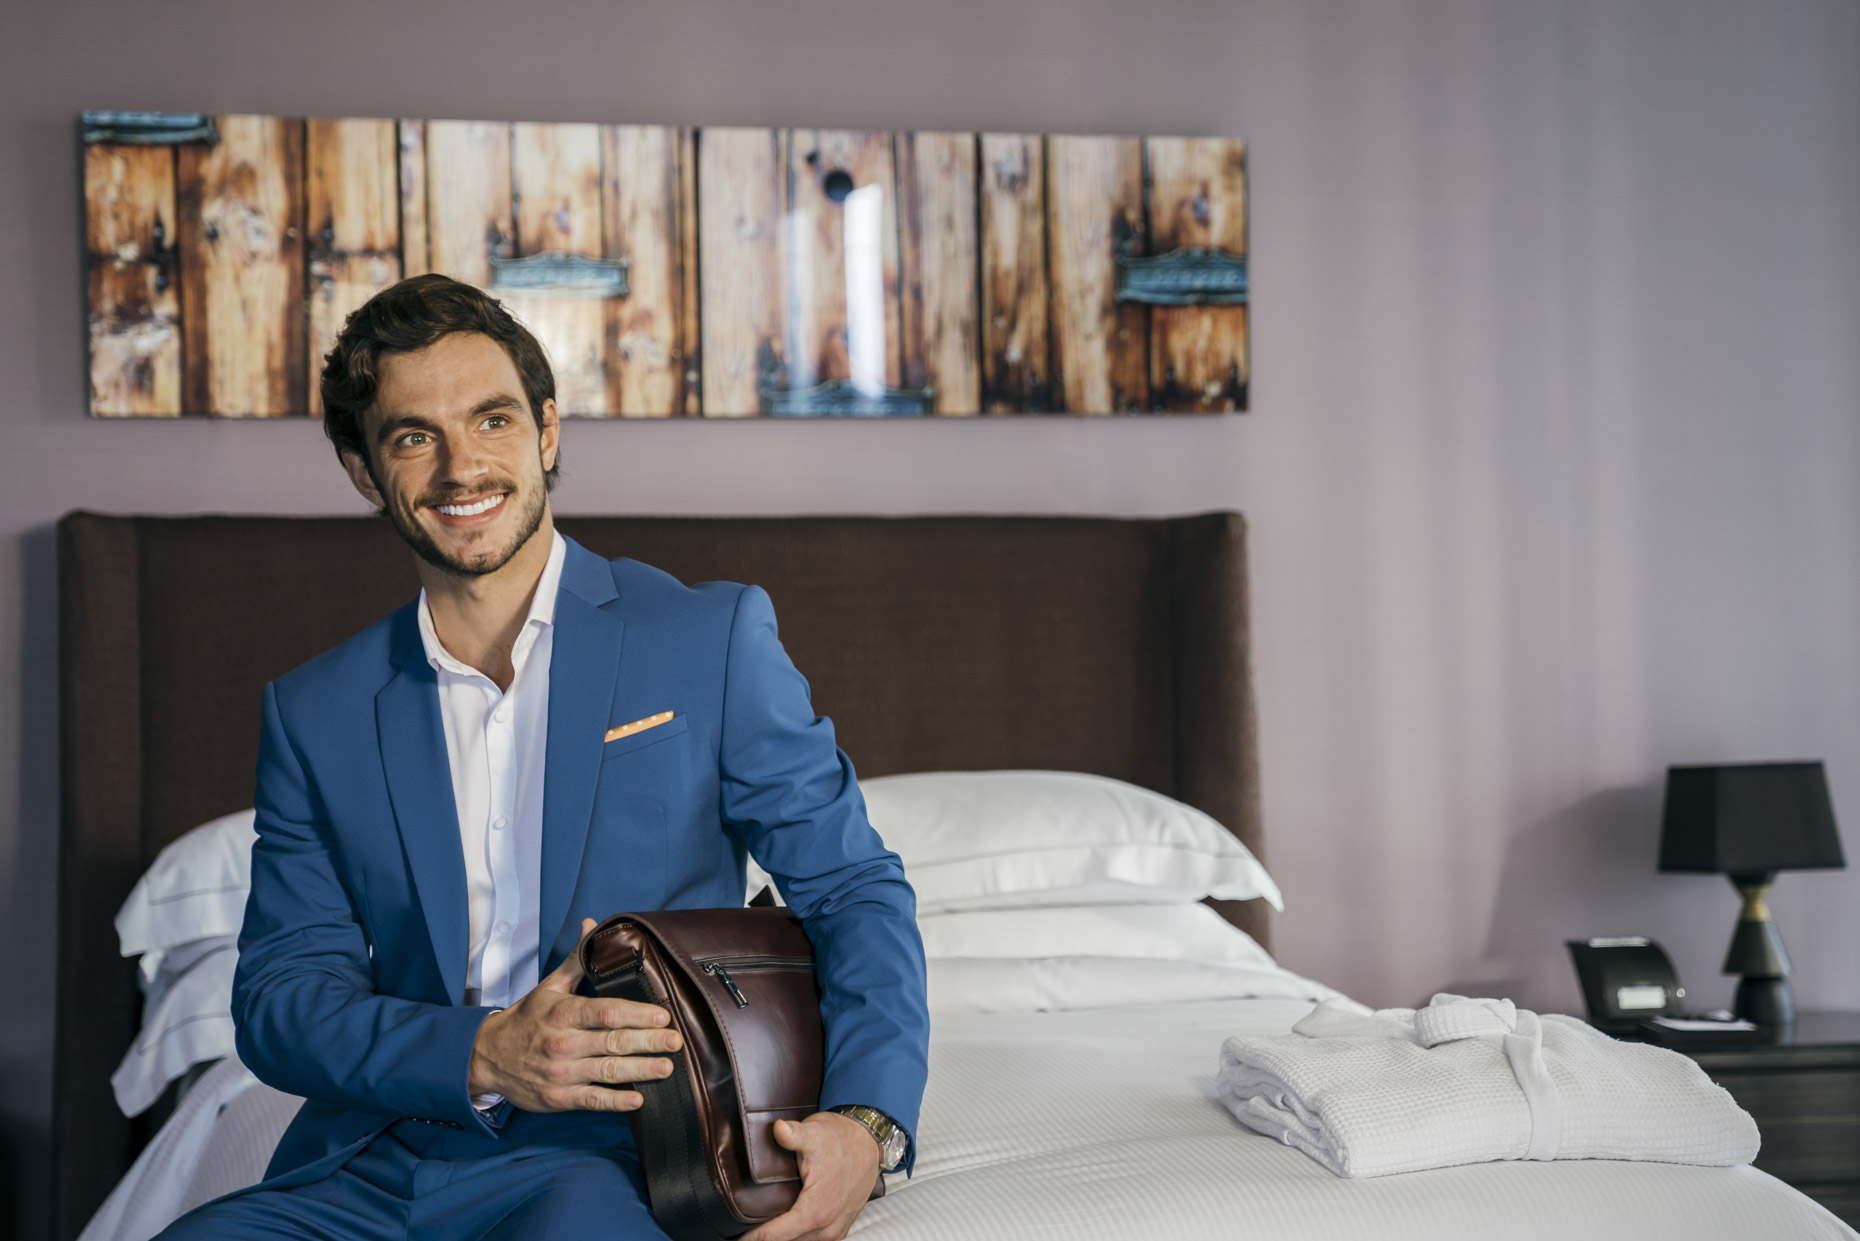 Smiling business man sitting on bed in Hilton Hotel room